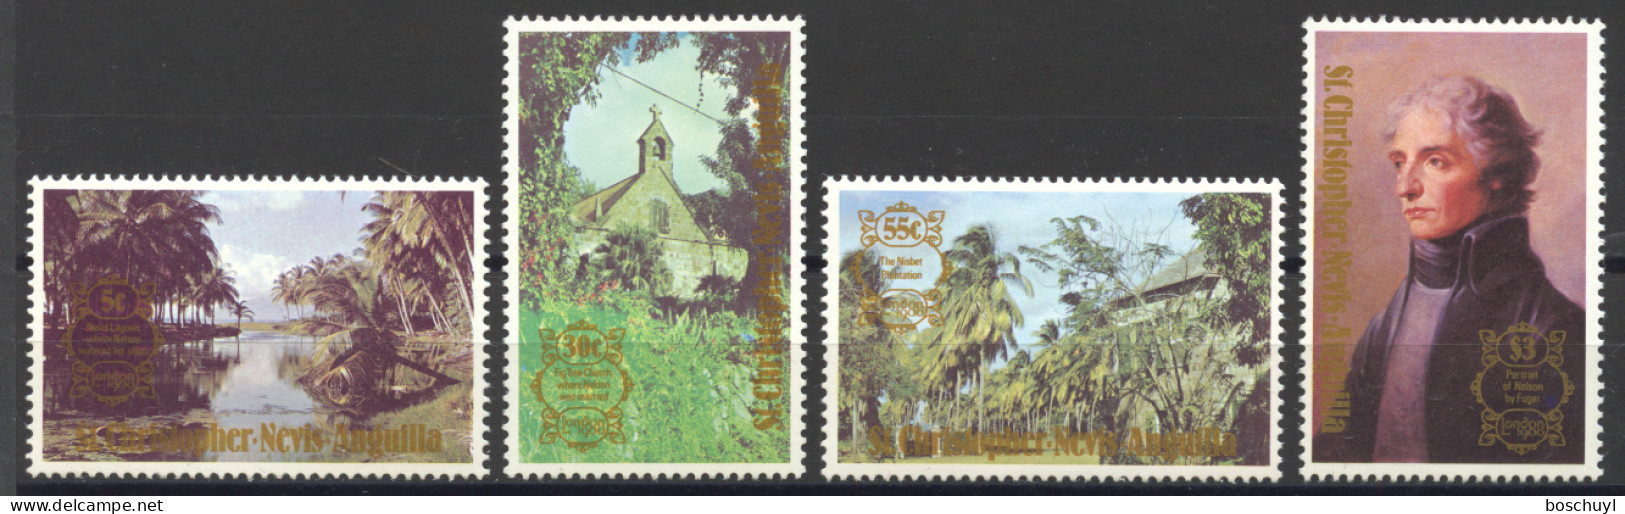 St Christopher, Nevis And Anguilla, 1980, London Stamp Exhibition, Lord Nelson, Lagoon, Church, MNH, Michel 392-395 - St.Christopher, Nevis En Anguilla (...-1980)